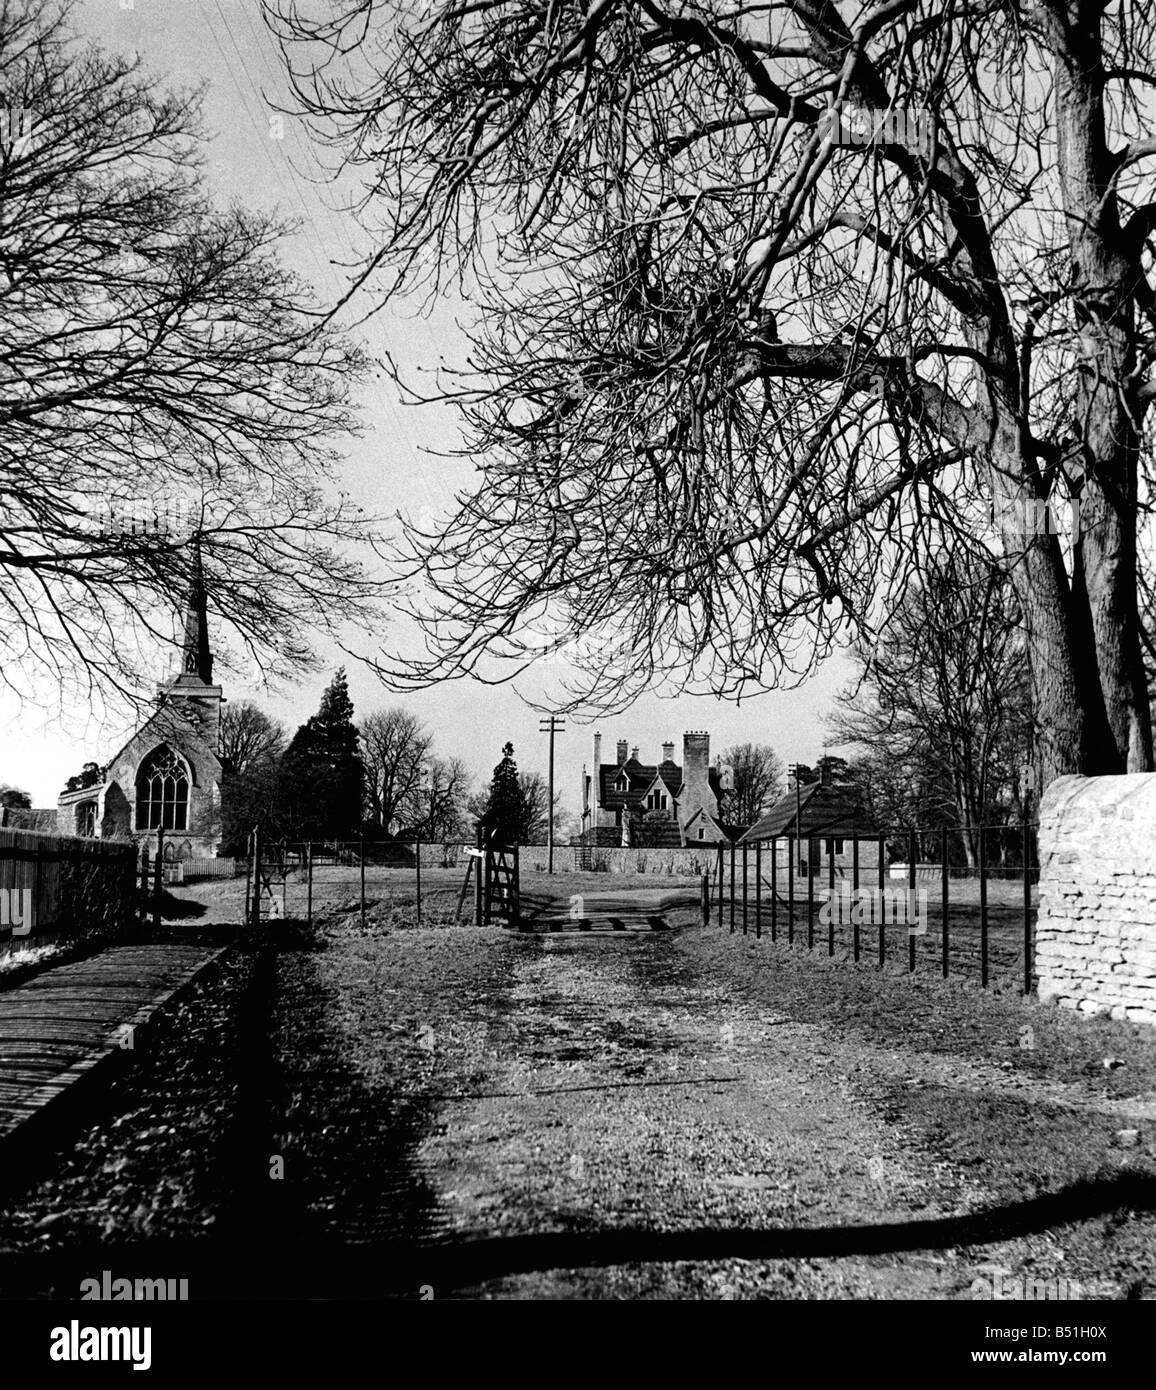 The Church of St. James, the register of which dates back to 1678, in the village of Grafton Underwood, Northants. The yew trees may be almost the same age as the Church but metal railings show the modern influence. Circa 1948 P000112; Stock Photo